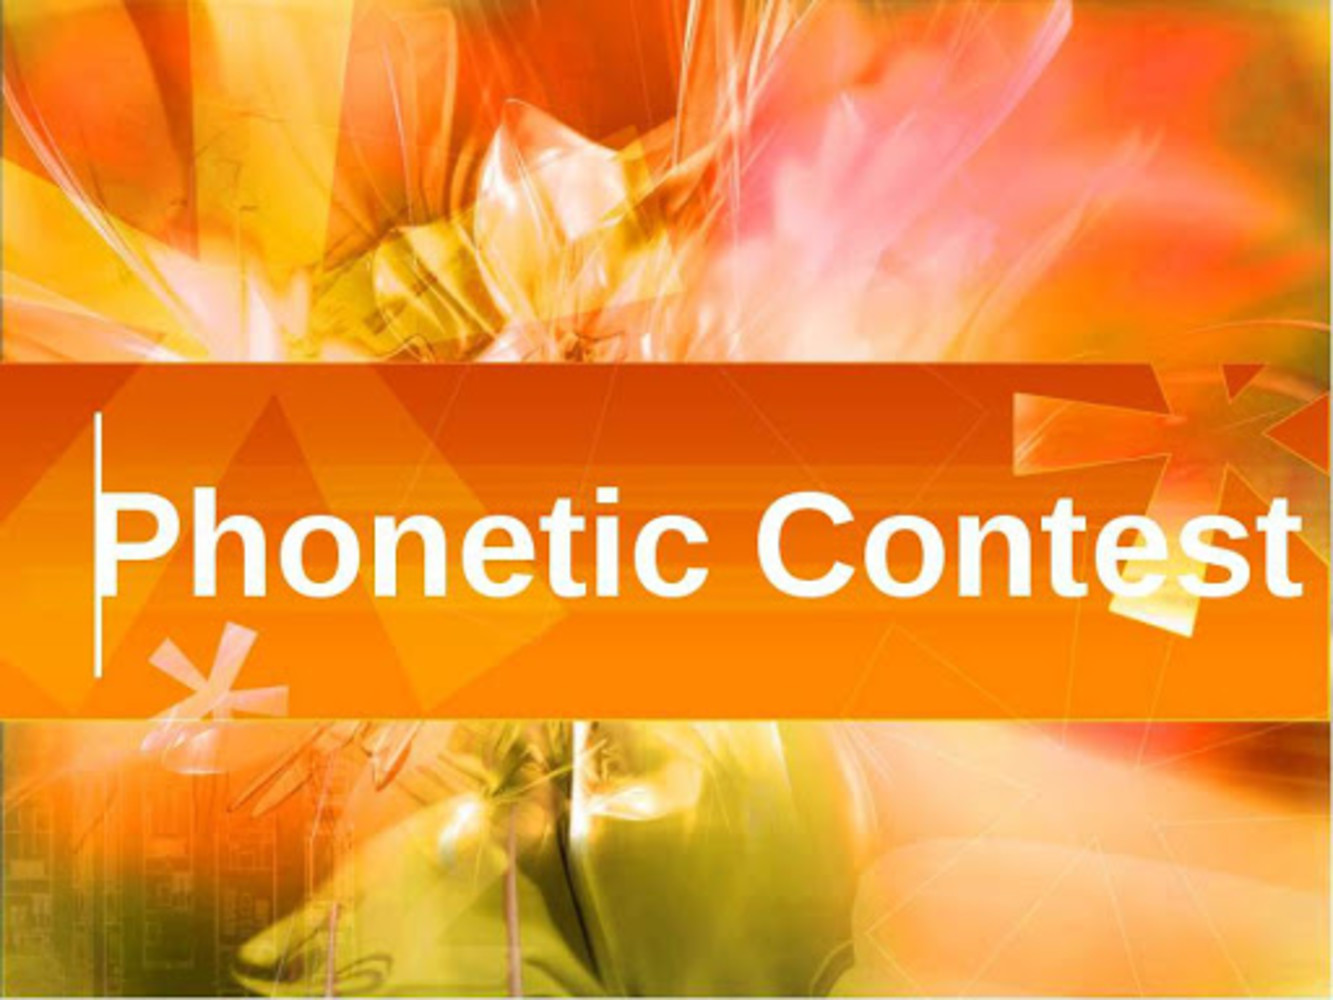 Ғ. Phonetic competition